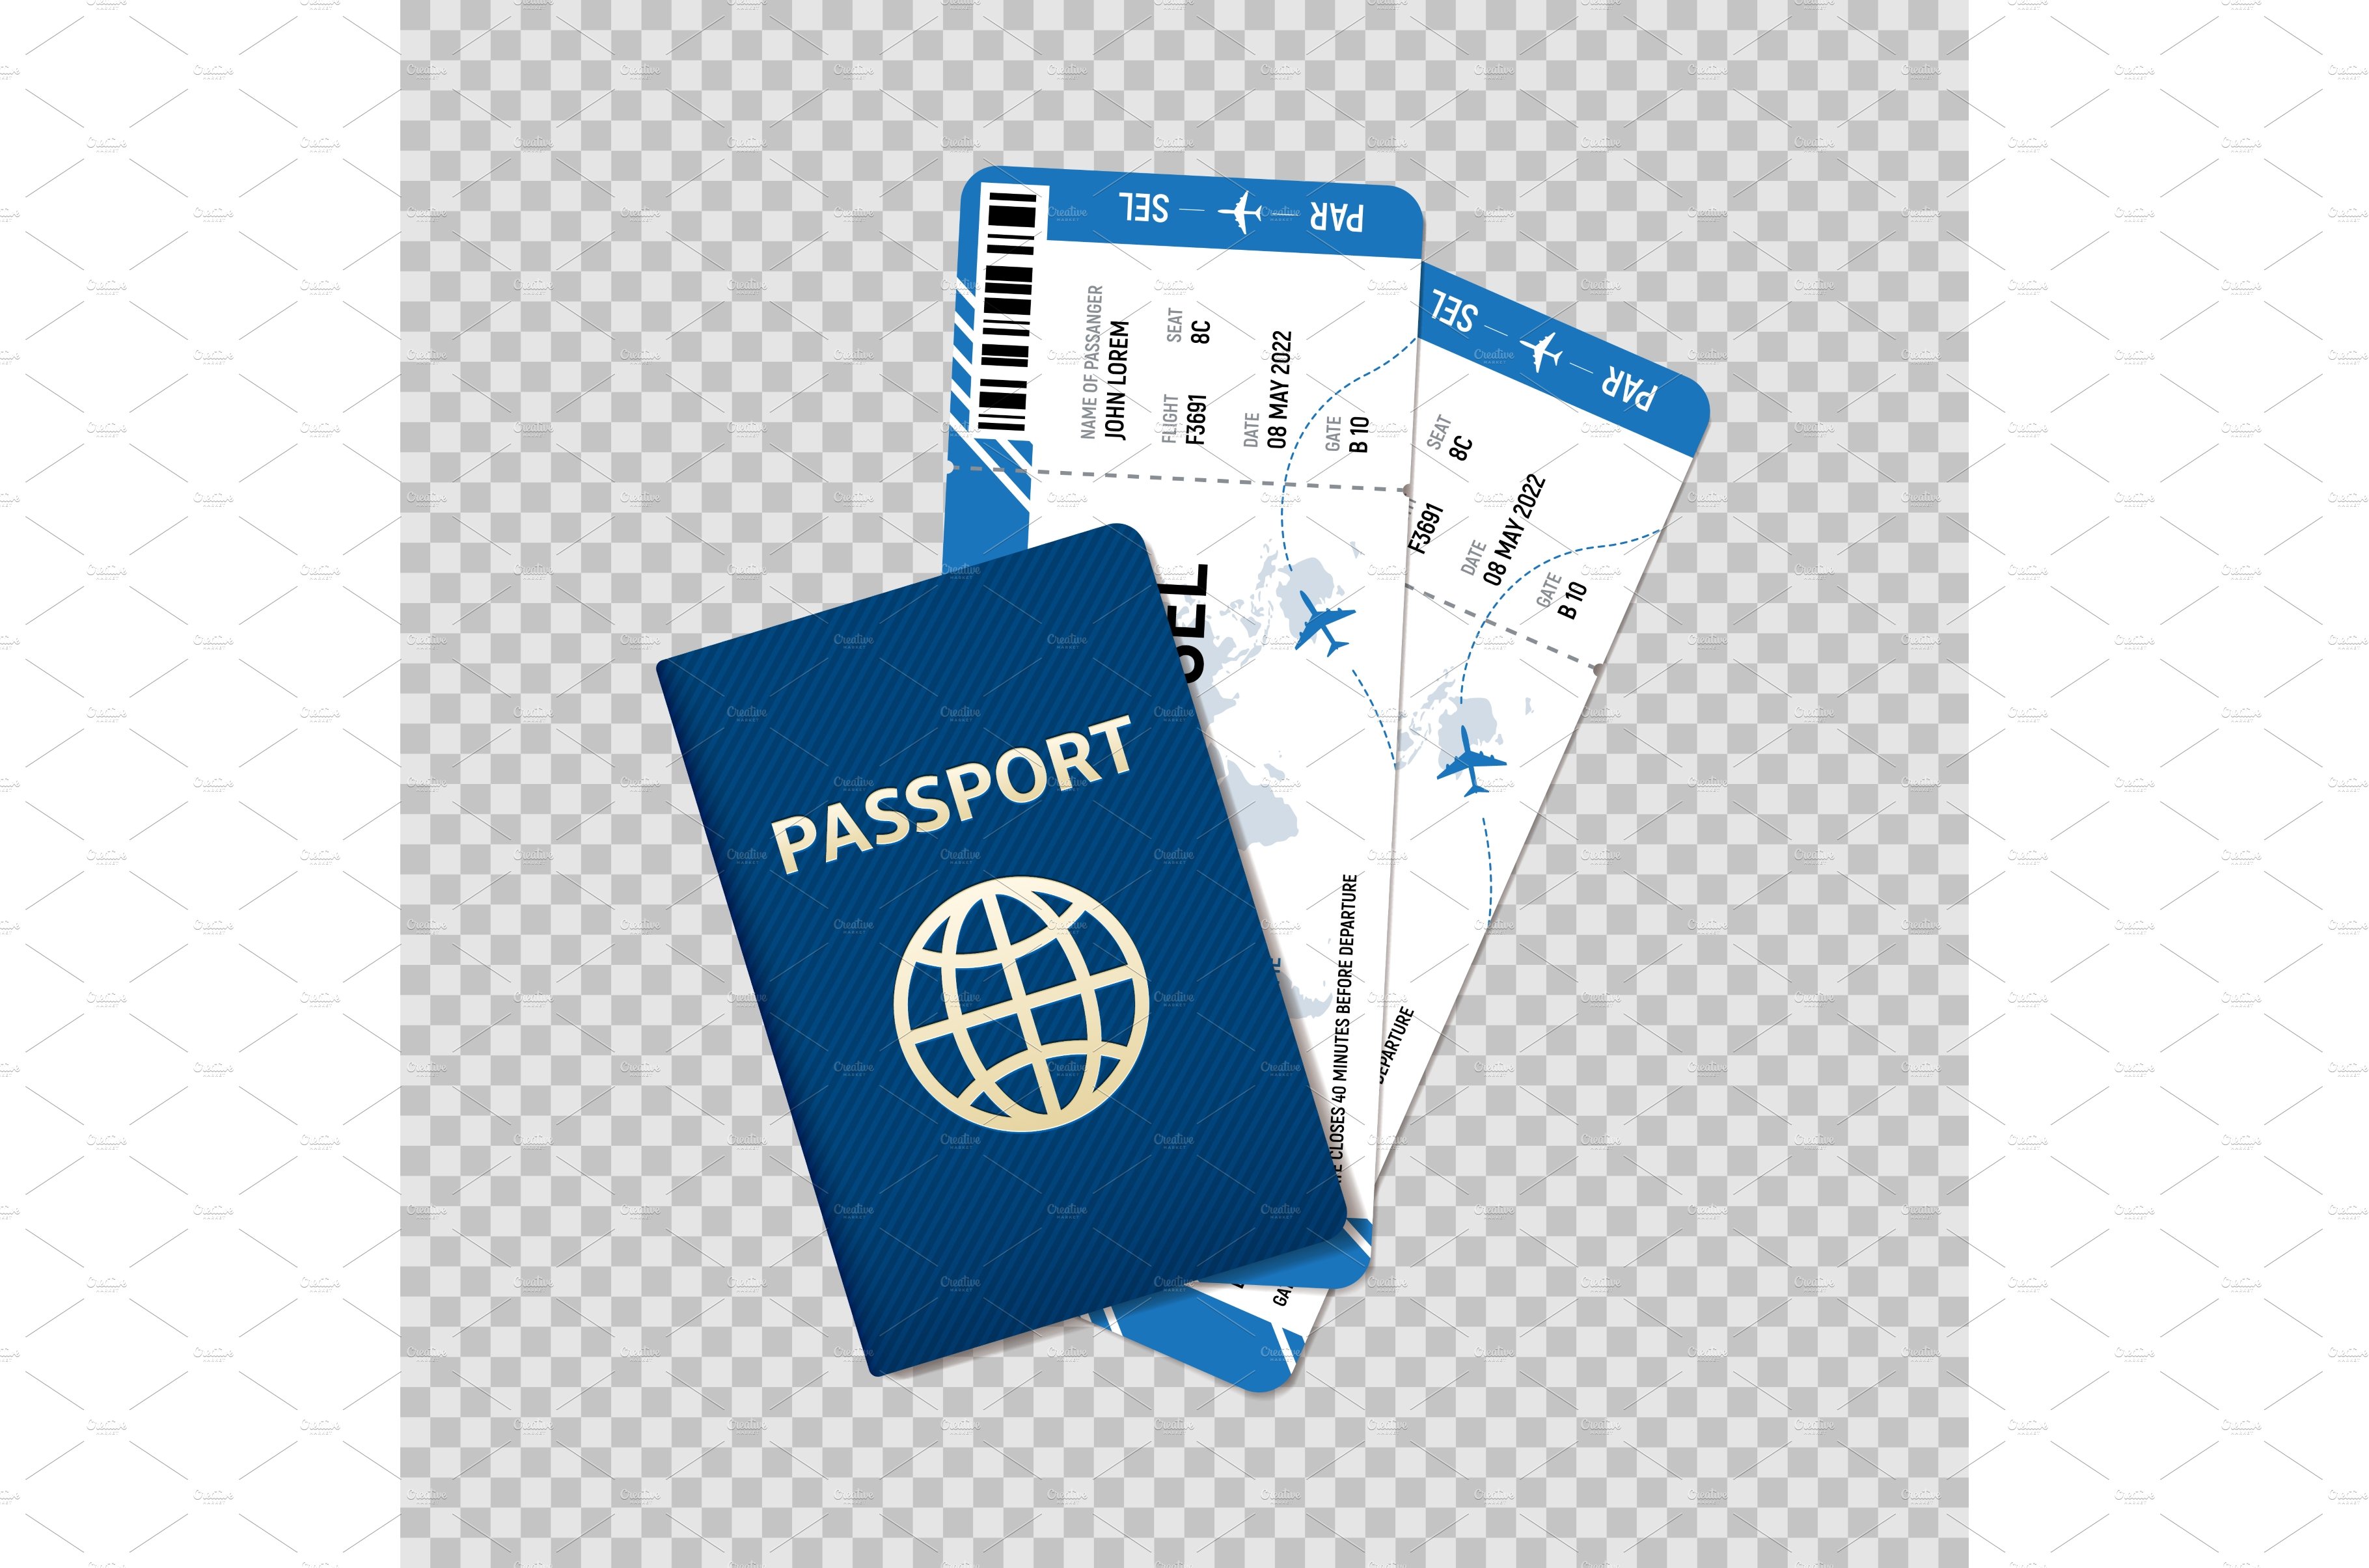 Passport and tickets on plane cover image.